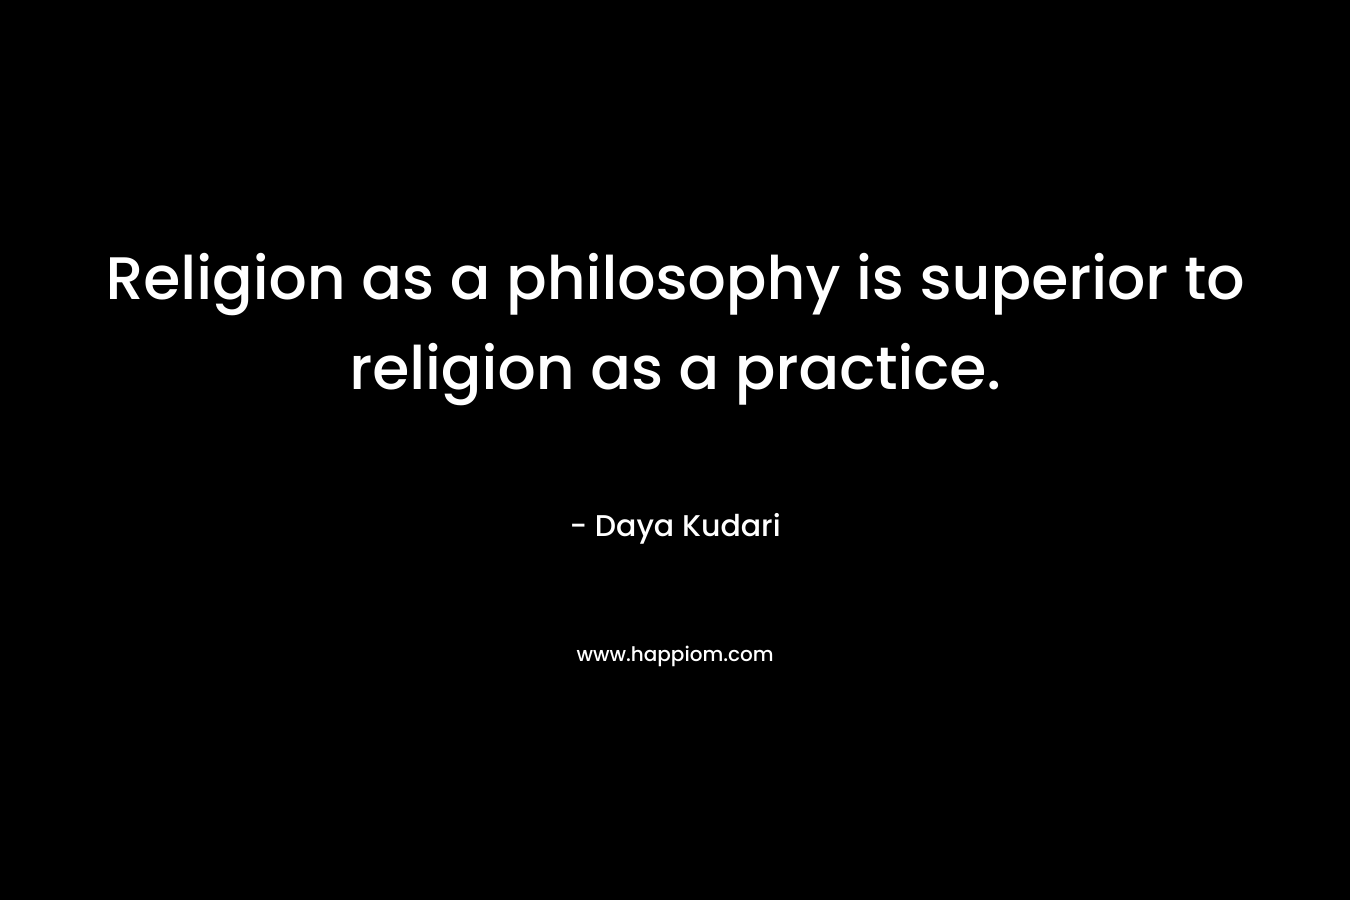 Religion as a philosophy is superior to religion as a practice. – Daya Kudari